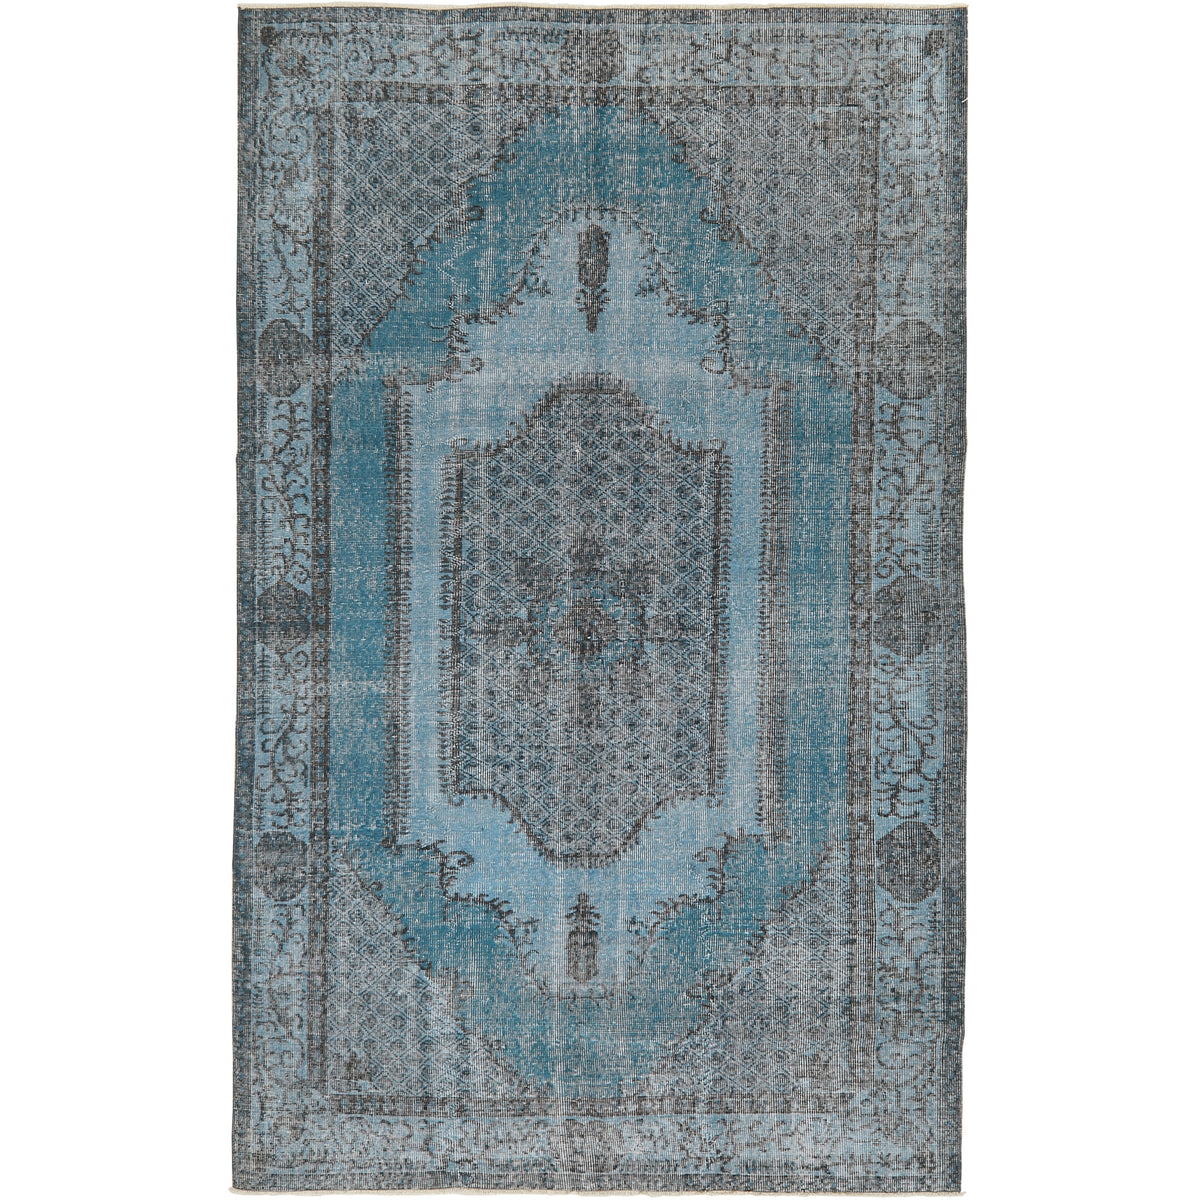 Emely - A Blue Medallion Masterpiece | Kuden Rugs